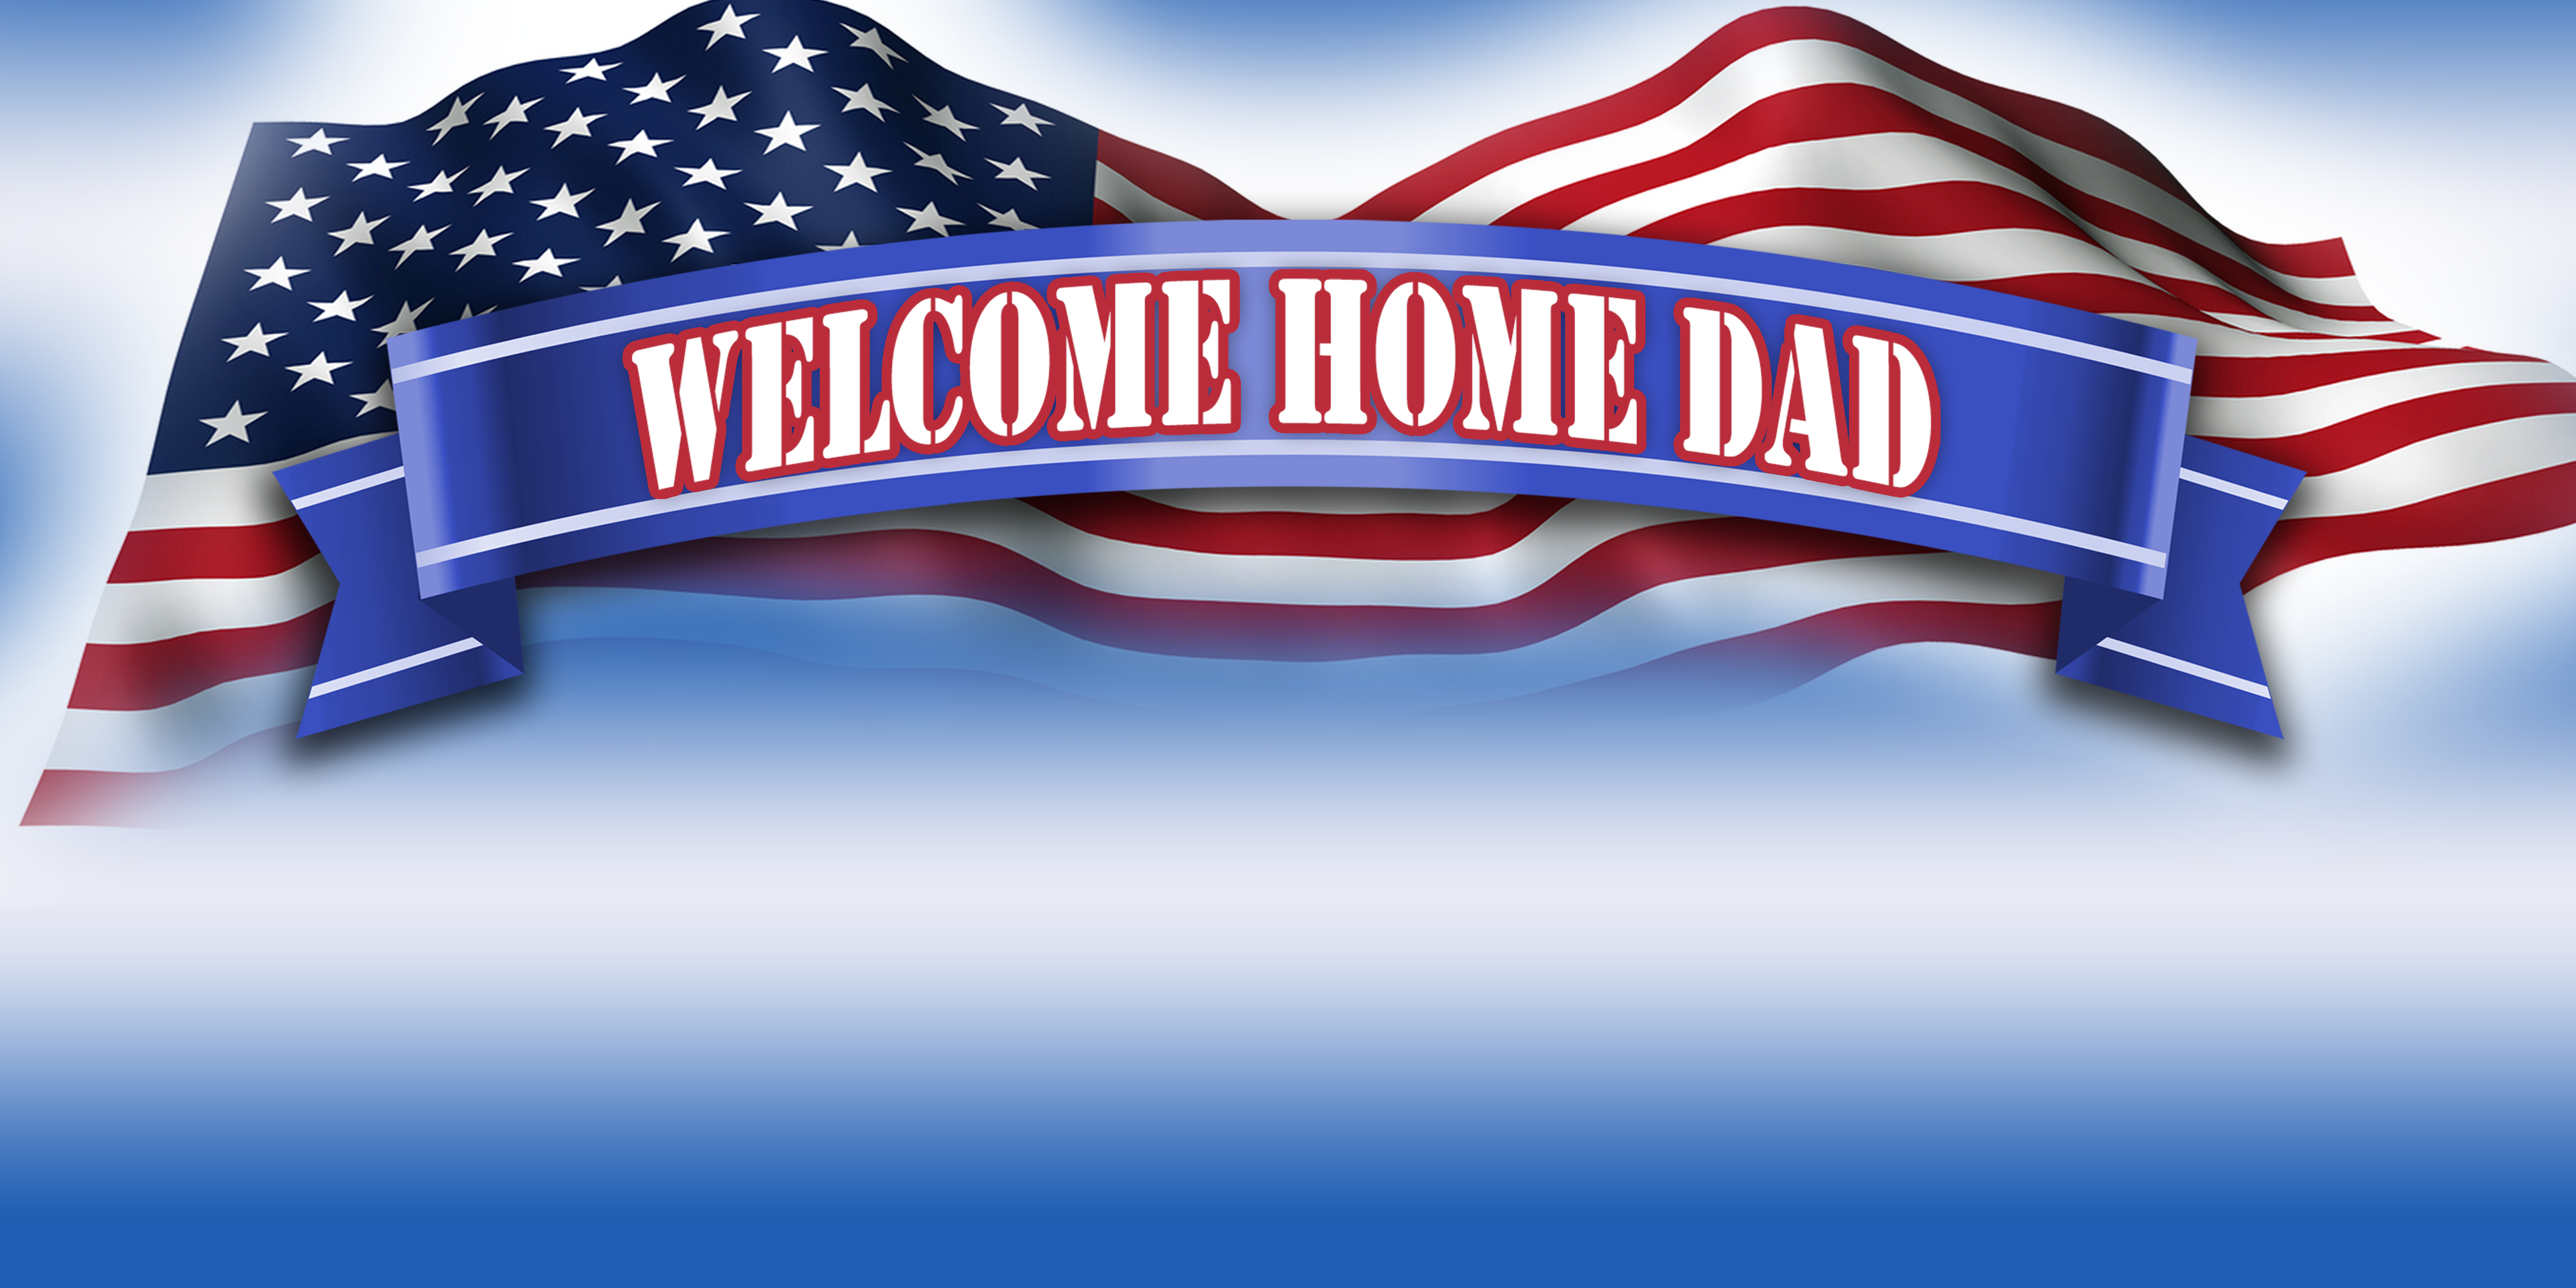 Military Banners Welcome Home Dad